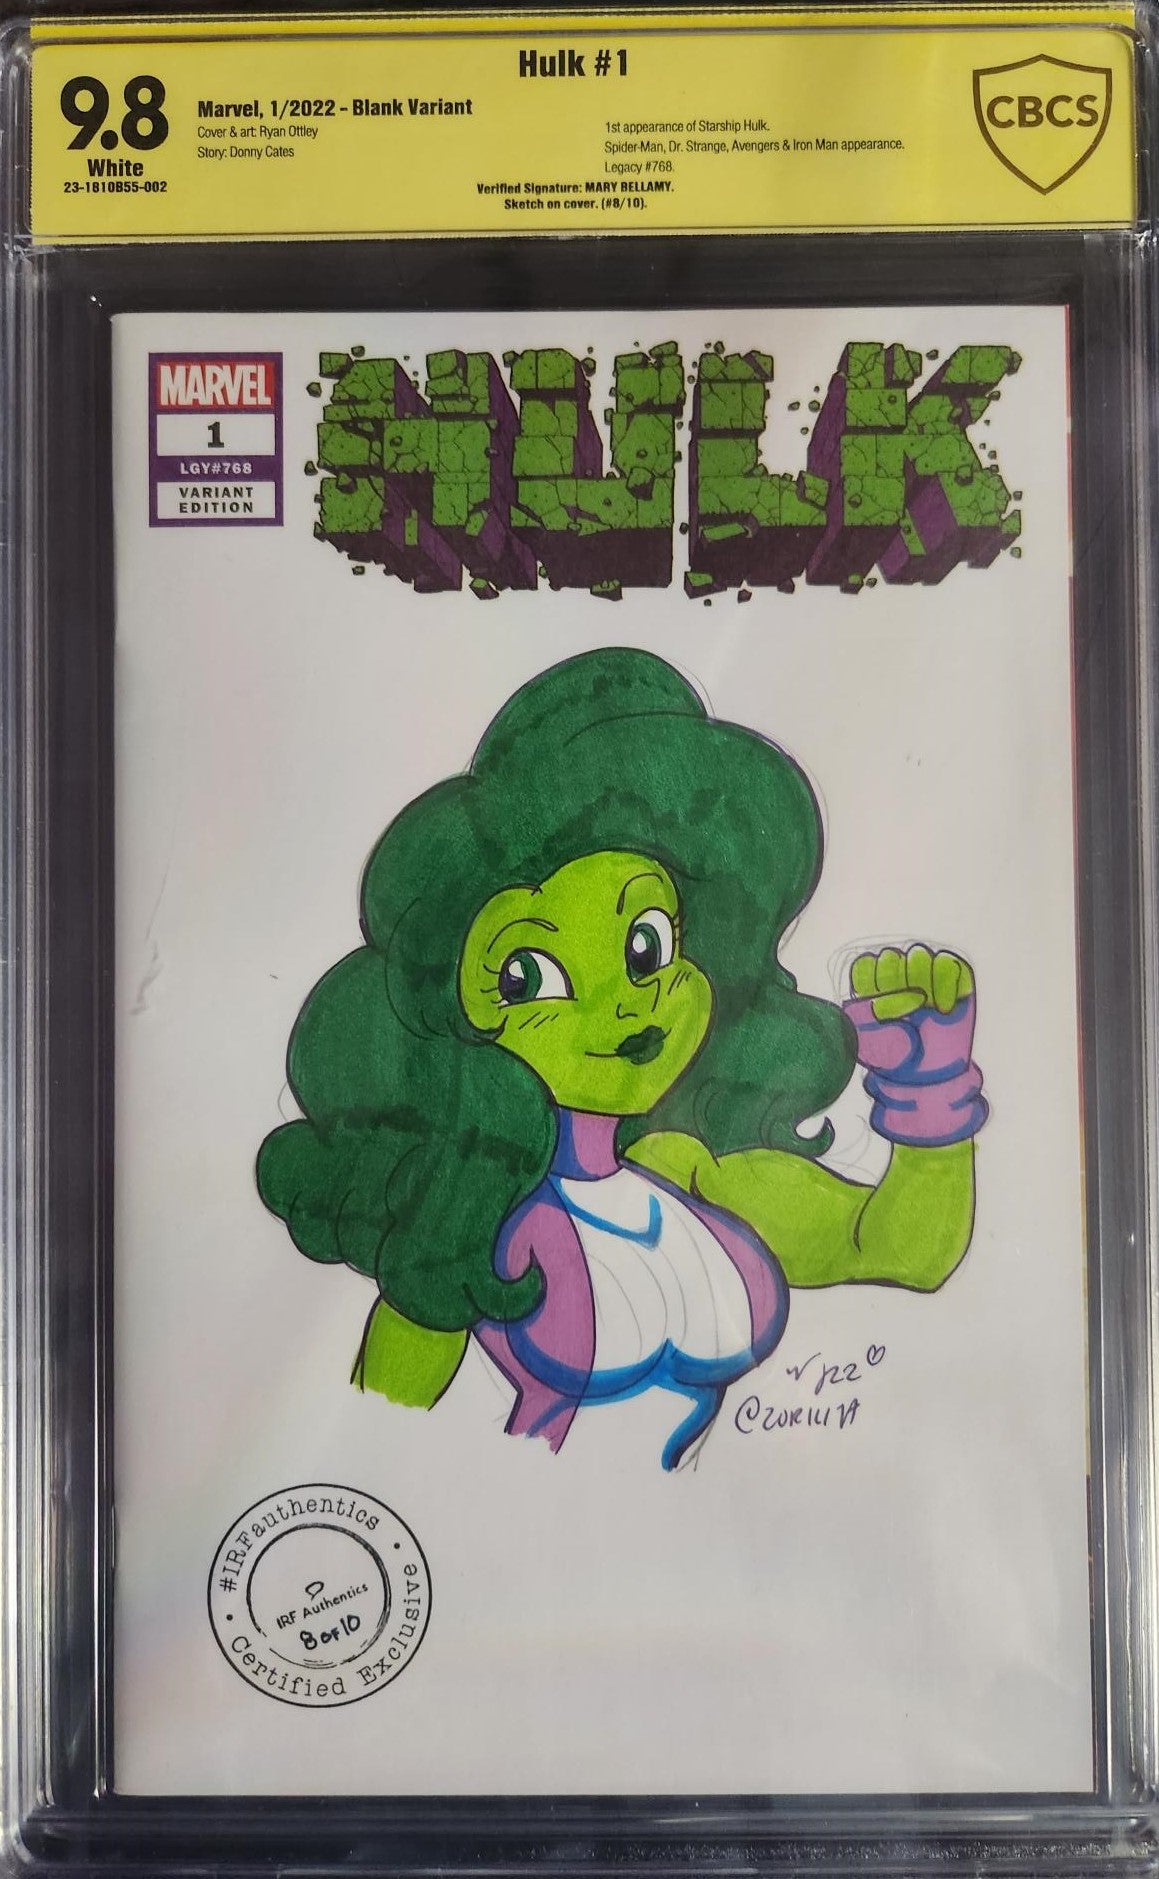 Mystery Chase for Original Art CBCS SS Hulk #1 CBCS SS 9.8 FULL COLOR SKETCH FROM MARY BELLAMY 1ST APP OF SPACESHIP HULK #8 OF 10